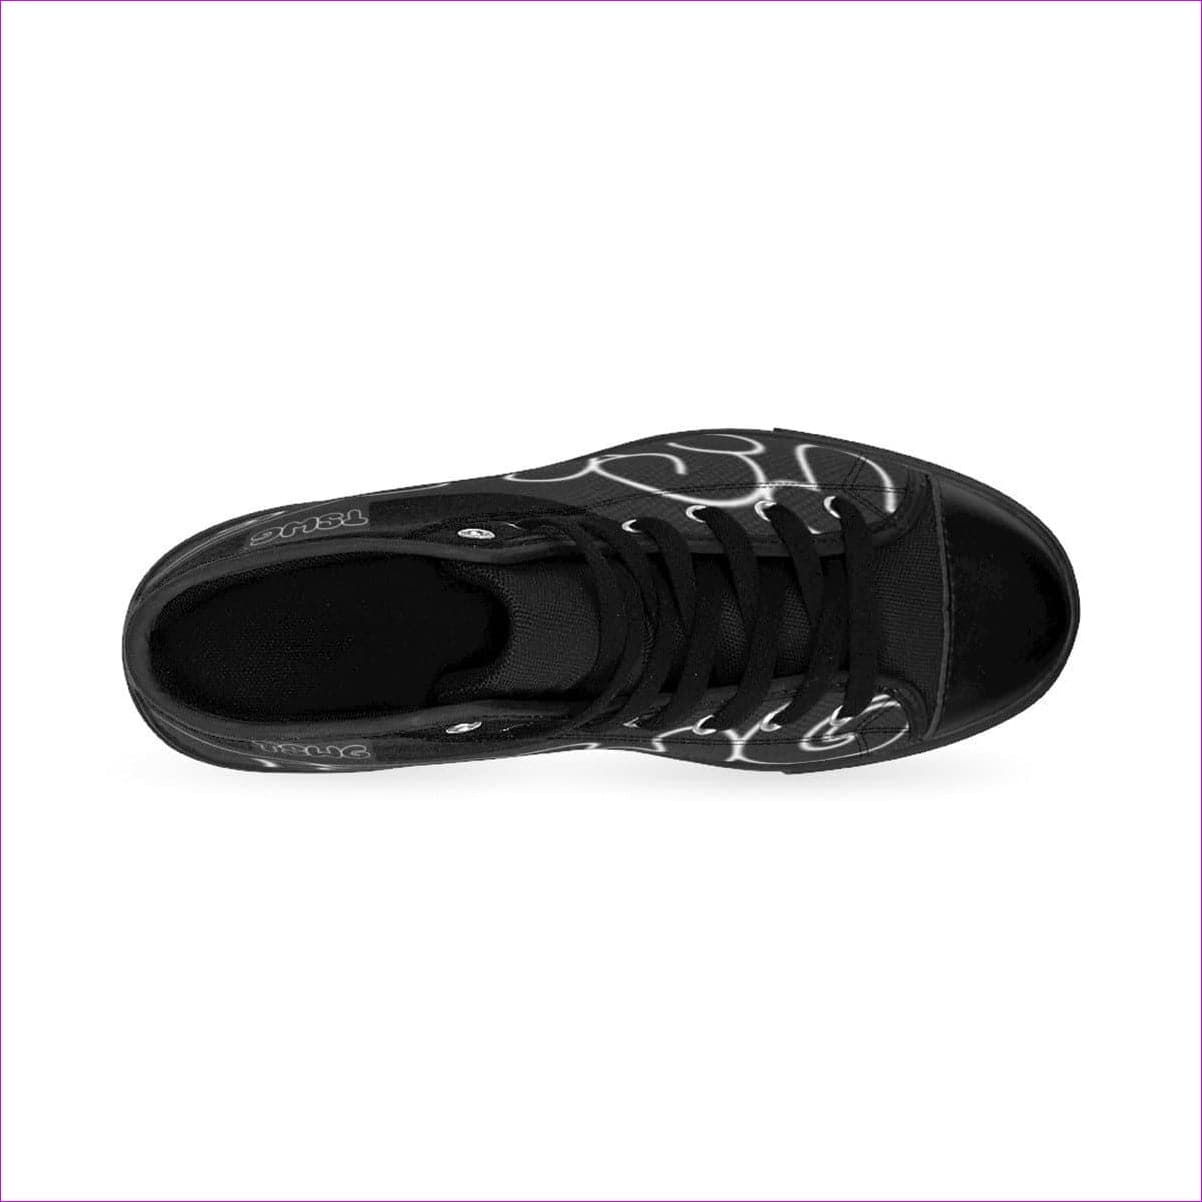 TSWG (Tough Smooth Well Groomed) Men's High-top Sneakers - men's shoe at TFC&H Co.